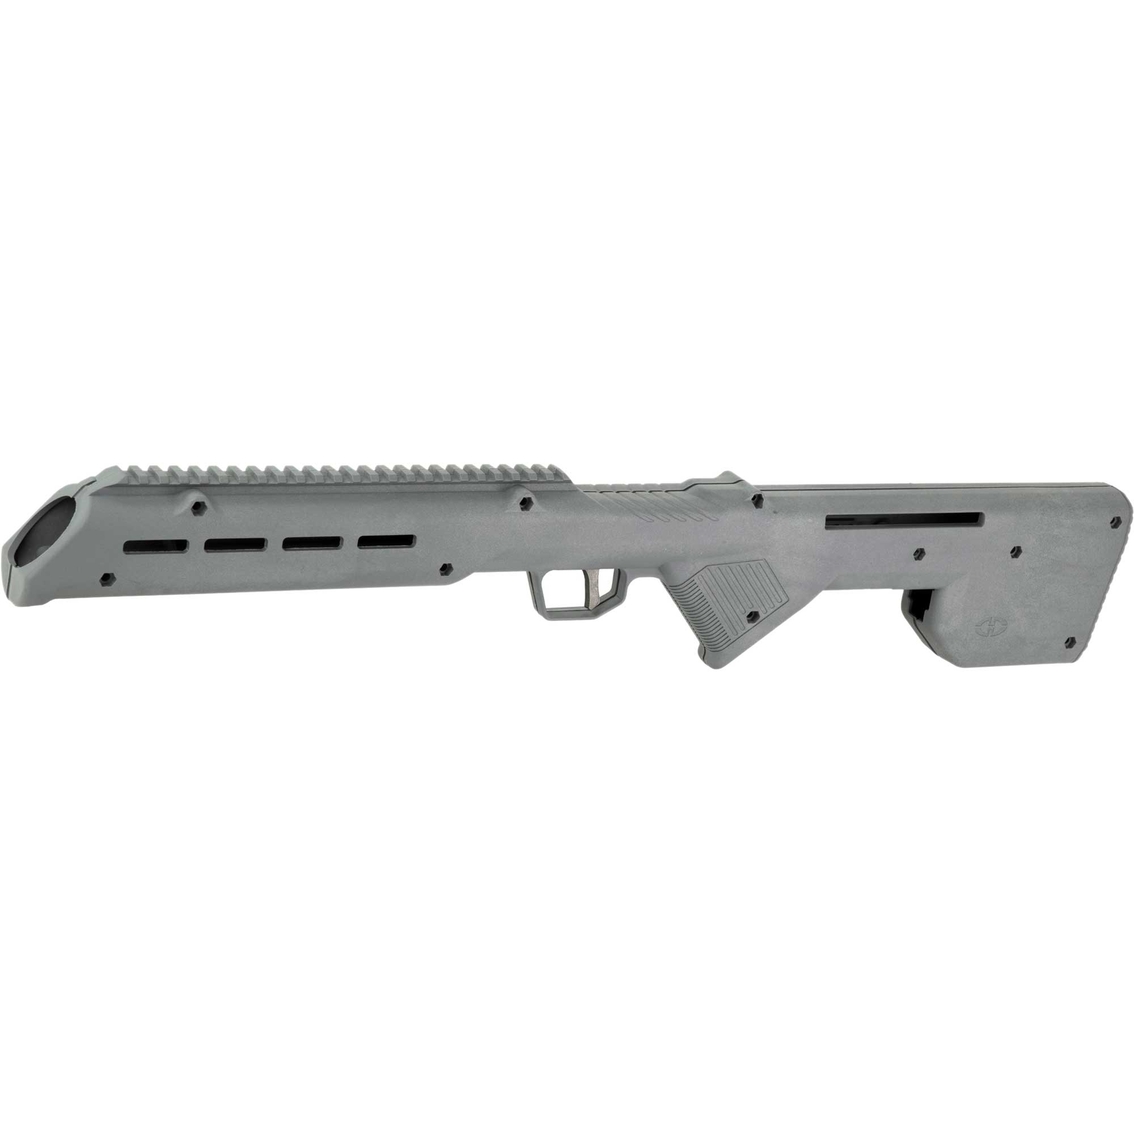 Desert Tech Trek-22 Chassis Fits Ruger 10/22 Rifle Gray - Image 3 of 3